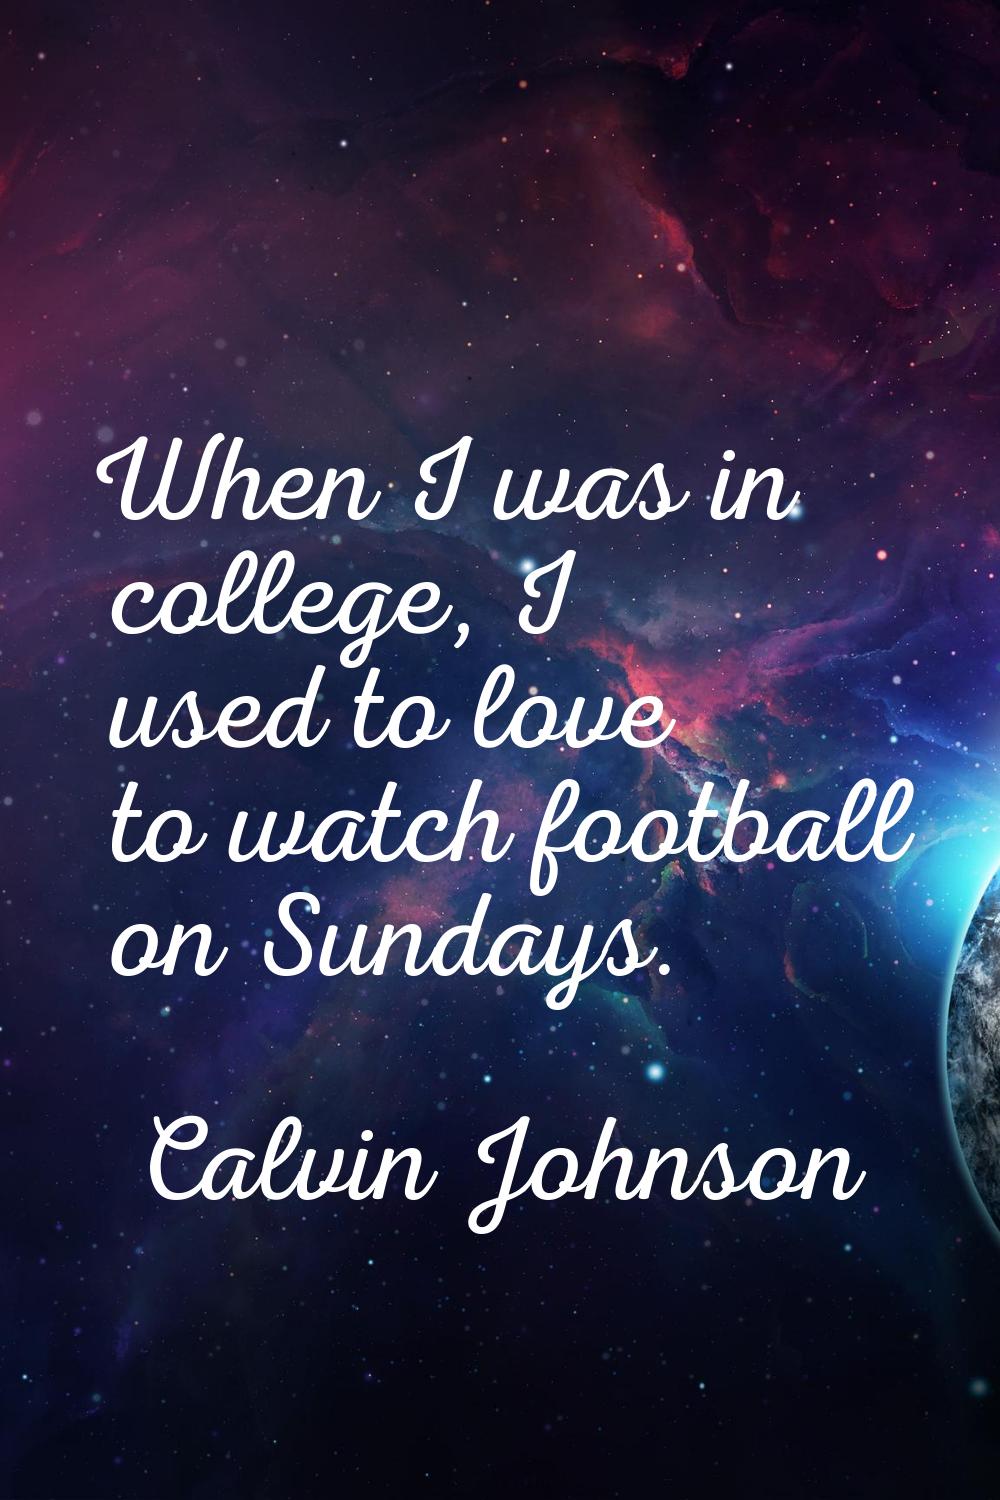 When I was in college, I used to love to watch football on Sundays.